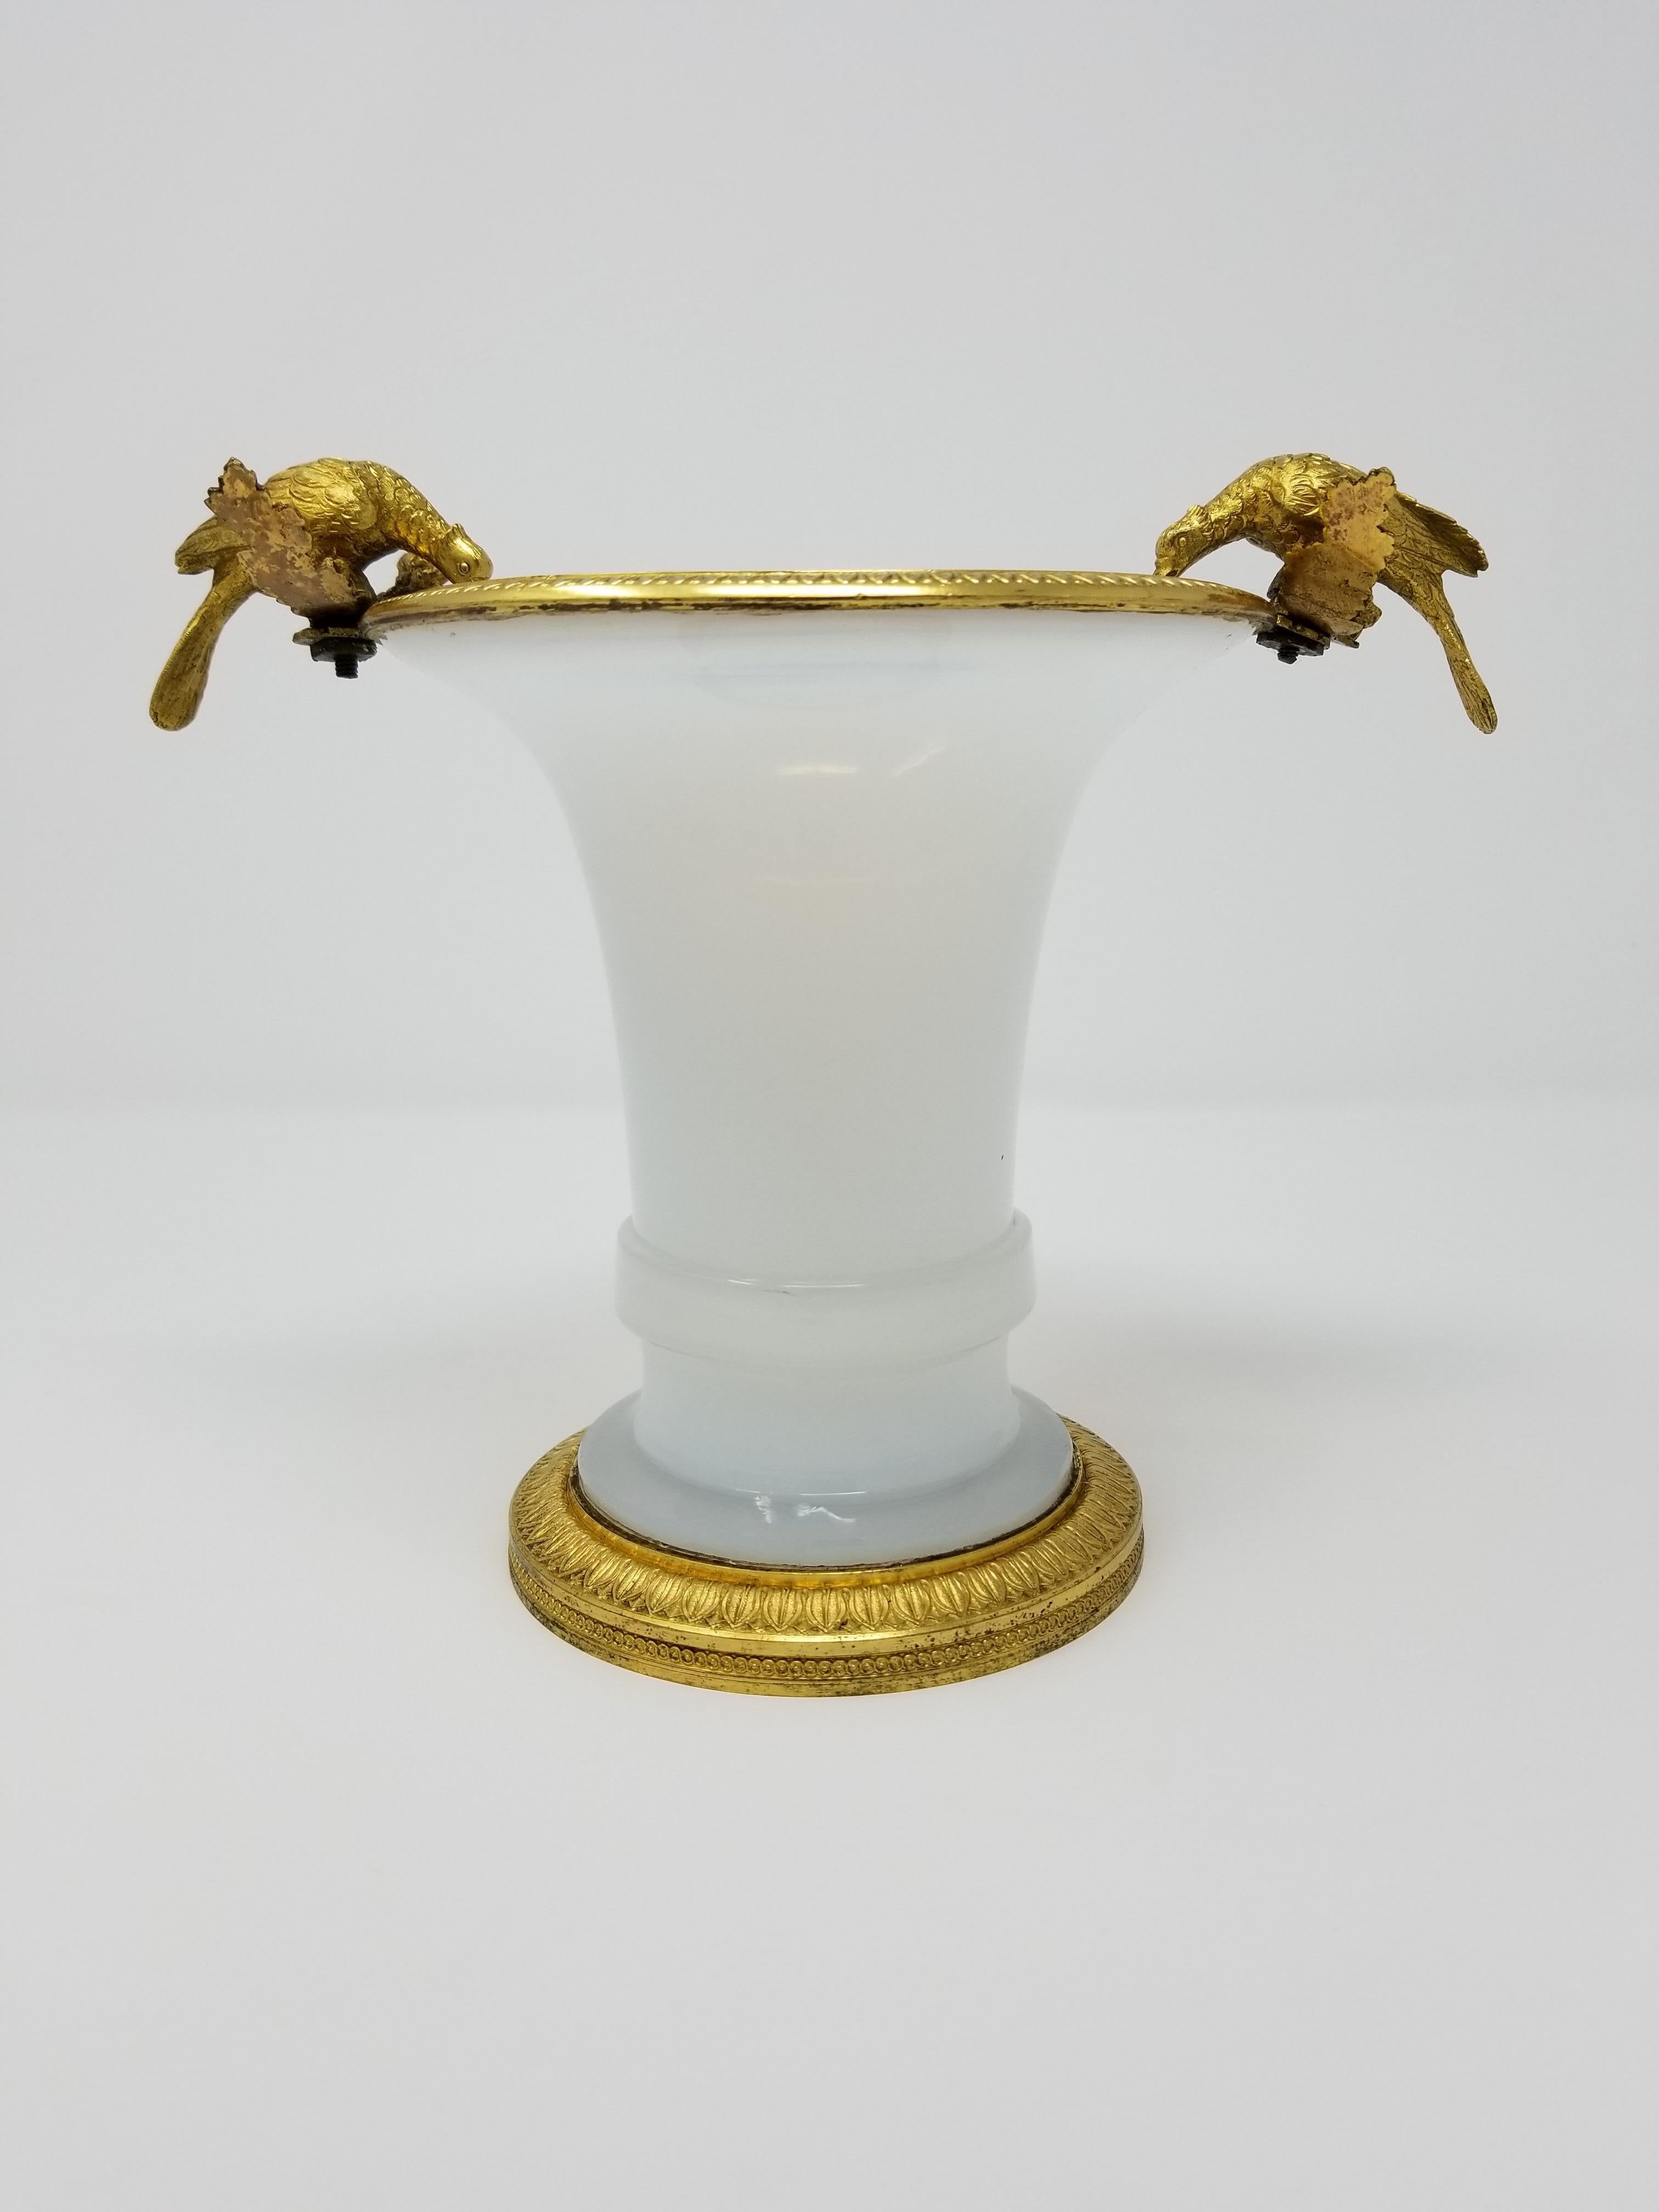 A fabulous Russian Empire/Louis XVI style white transparent opaline and ormolu-mounted vase/centerpiece, attributed to the Imperial Russian Glass Manufactory, from the estate of Peggy and David Rockefeller. Surmounted on top are two beautifully